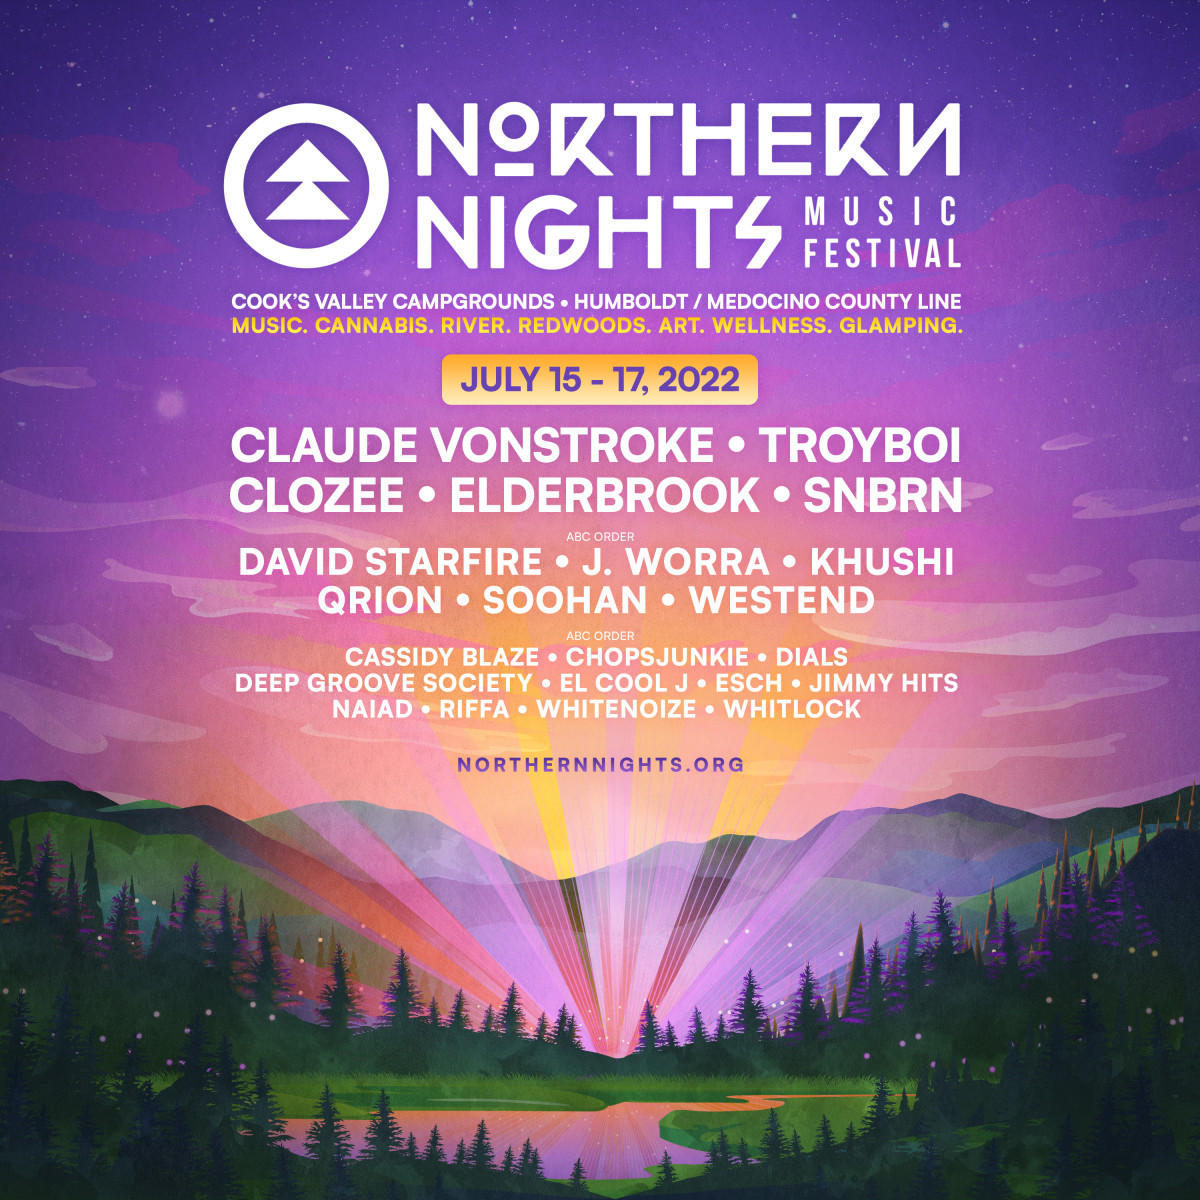 Northern Nights 2022 lineup featuring TroyBoi, CloZee, Elderbrook, SNBRN, and more.